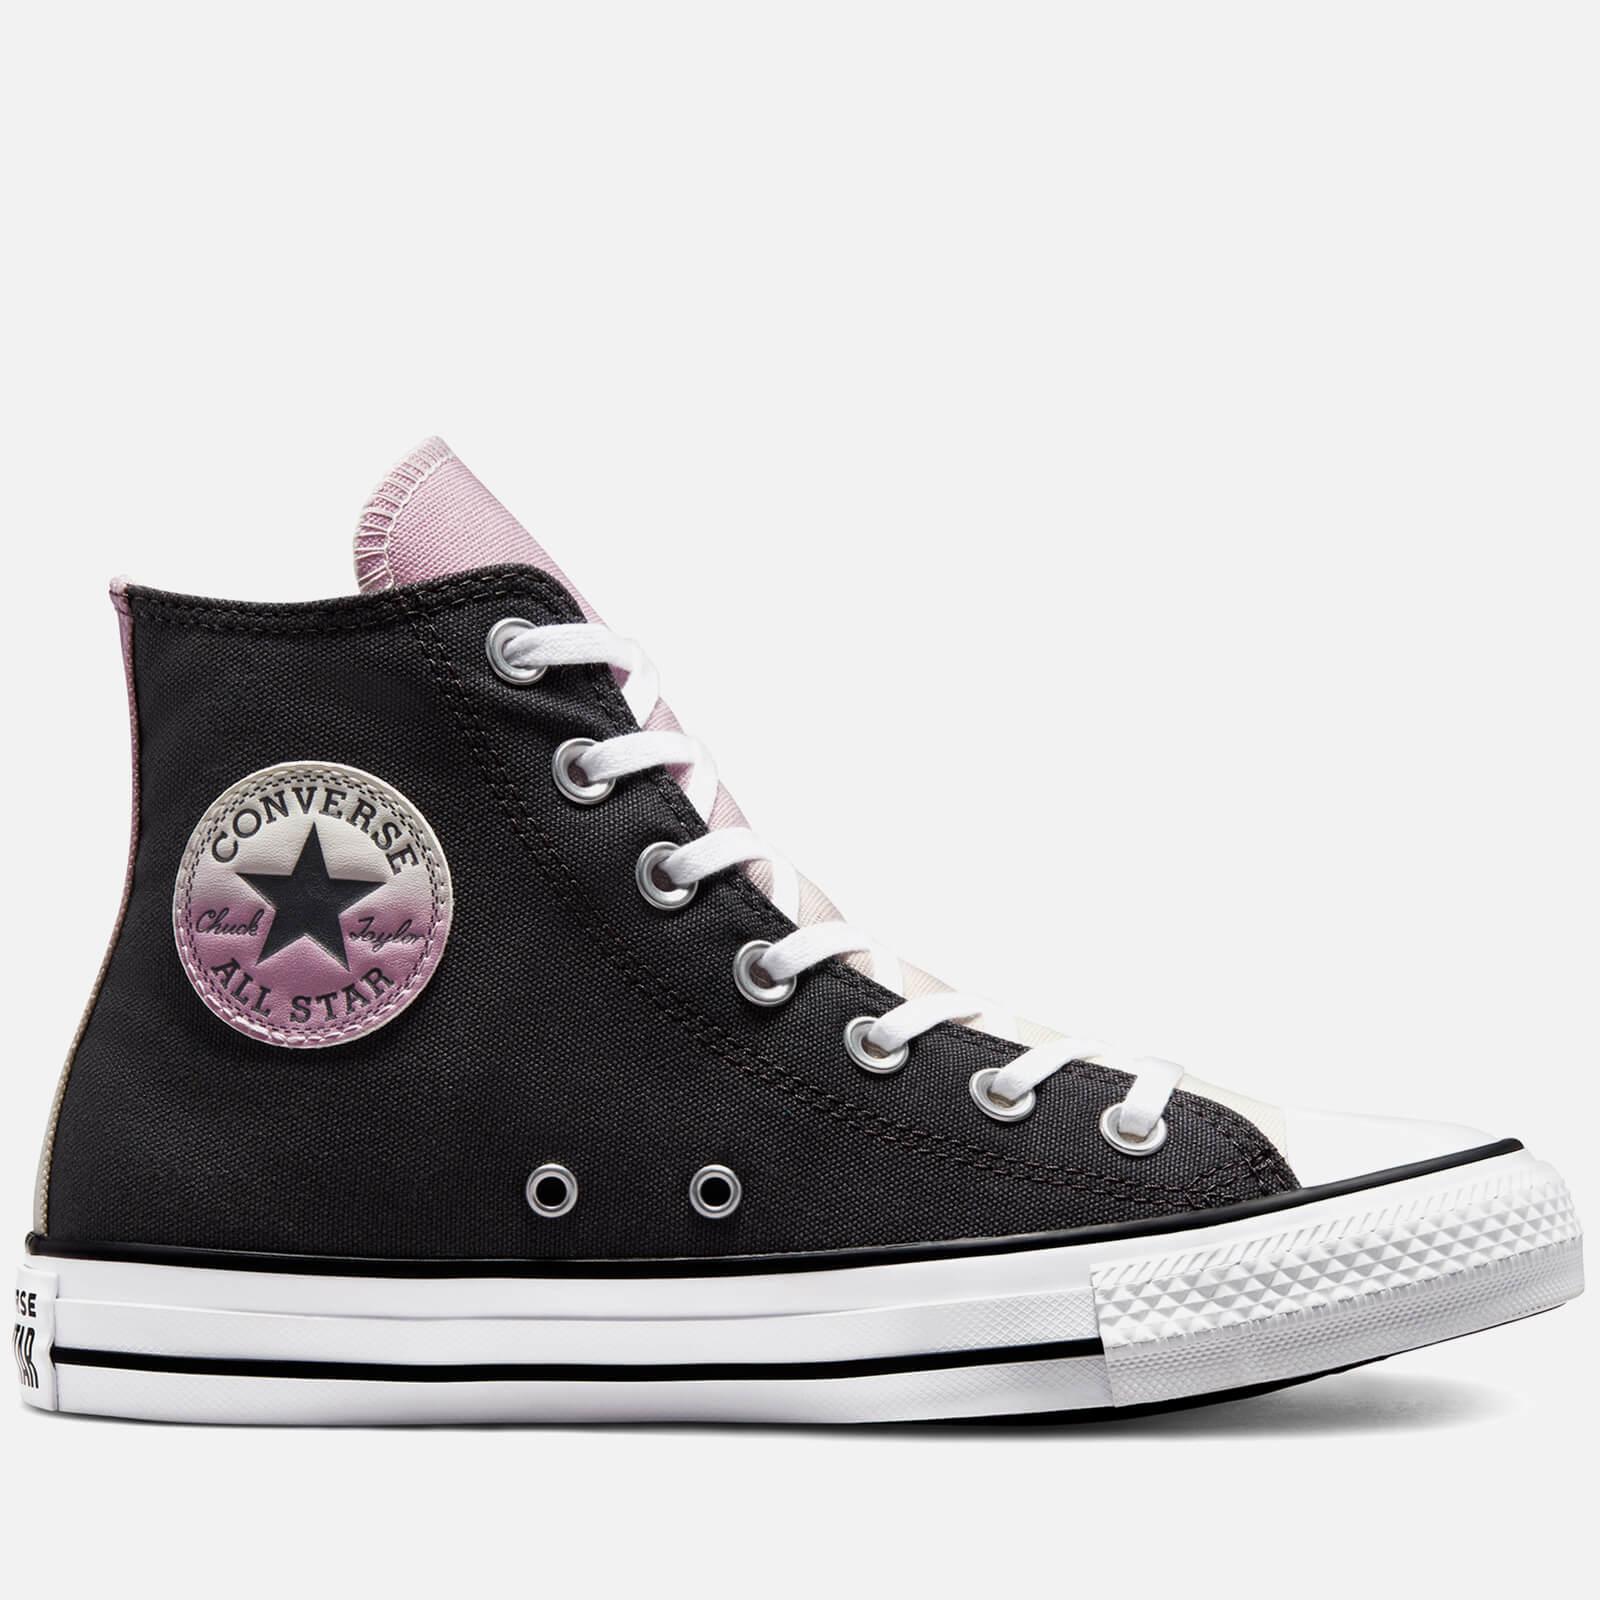 Converse Chuck Taylor All Star Ombré Hi-top Trainers in Black | Lyst Canada